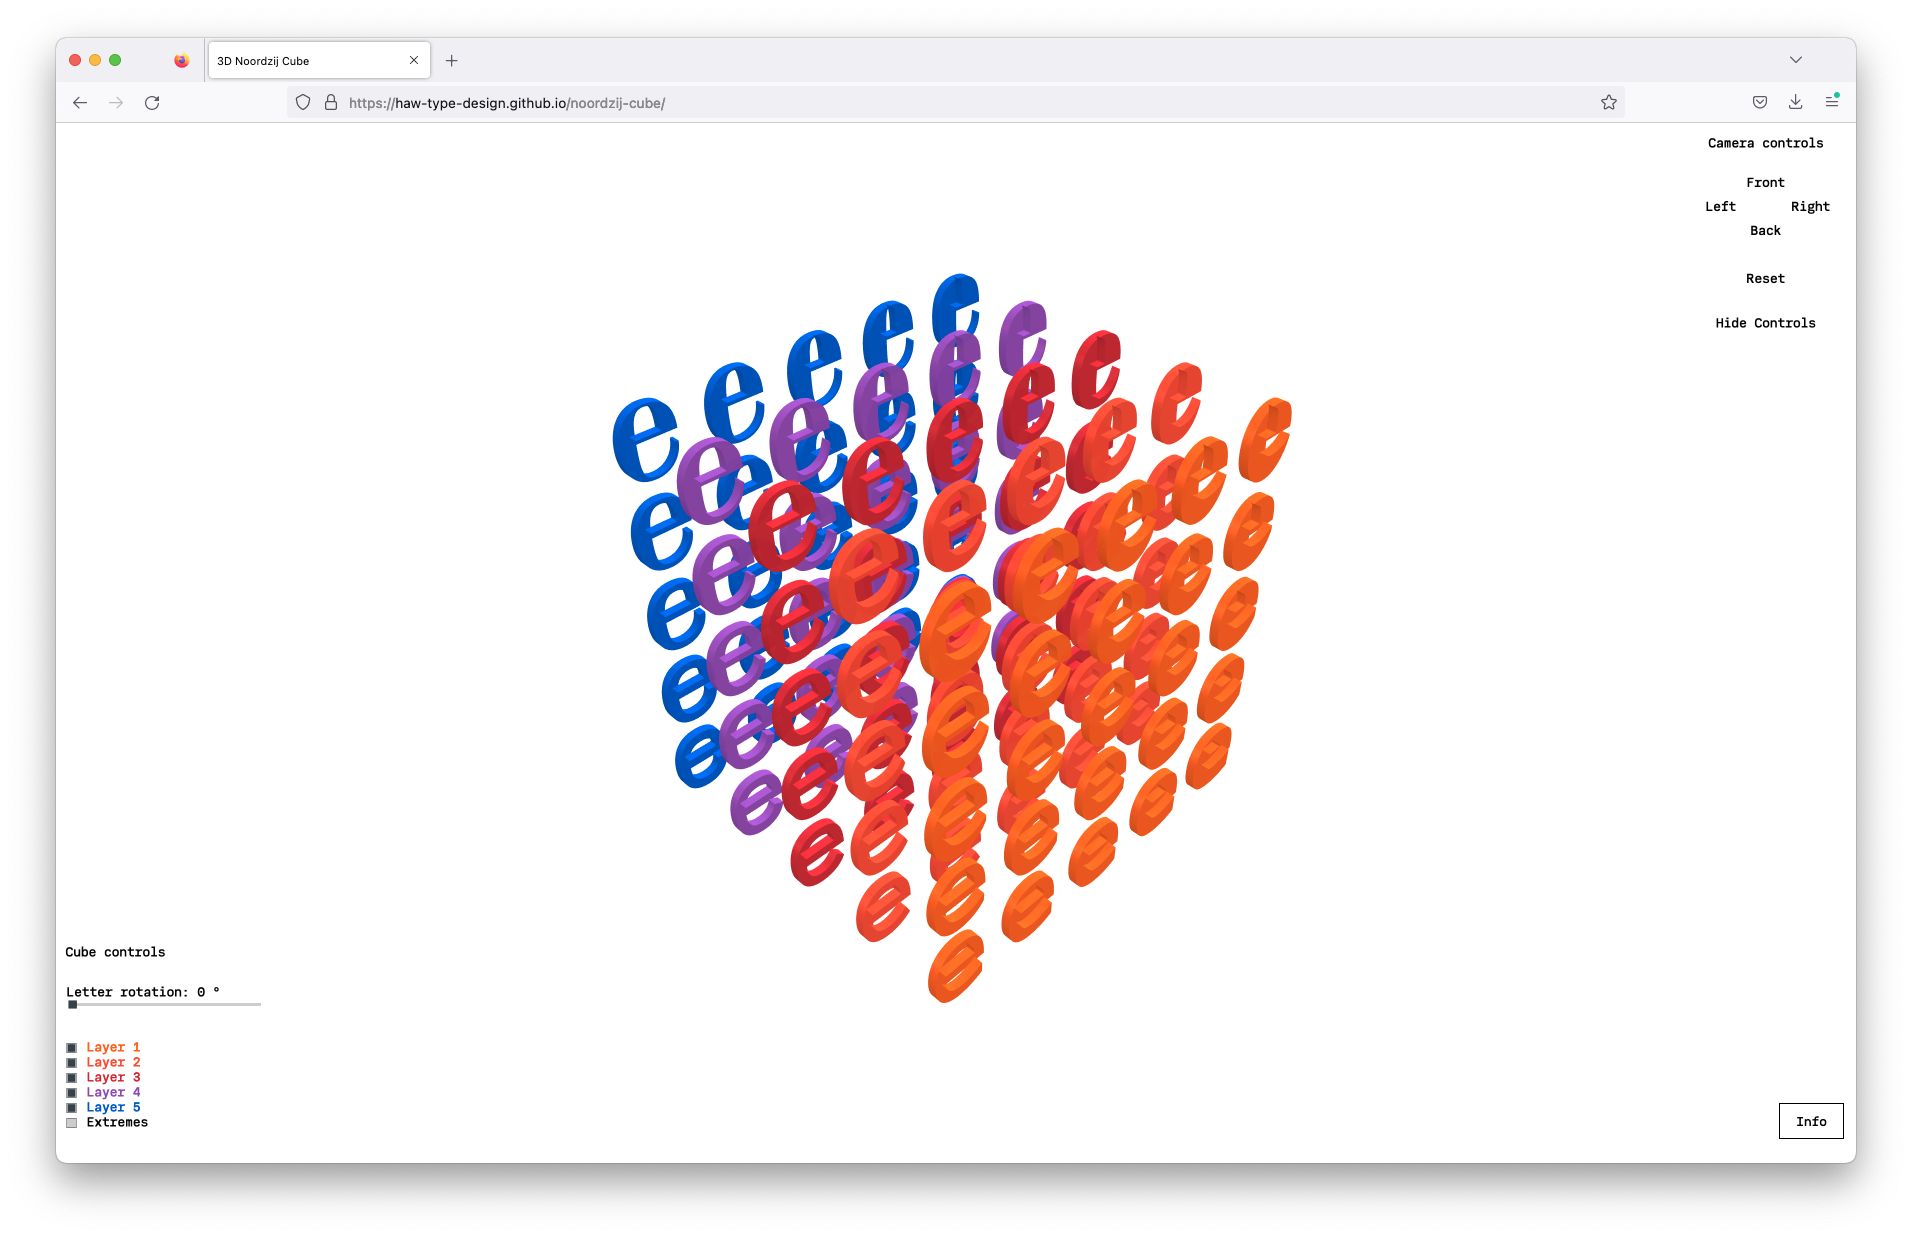 A browser window showing the 3D Noordzij cube from the top left corner. The e’s are coloured from orange to blue.